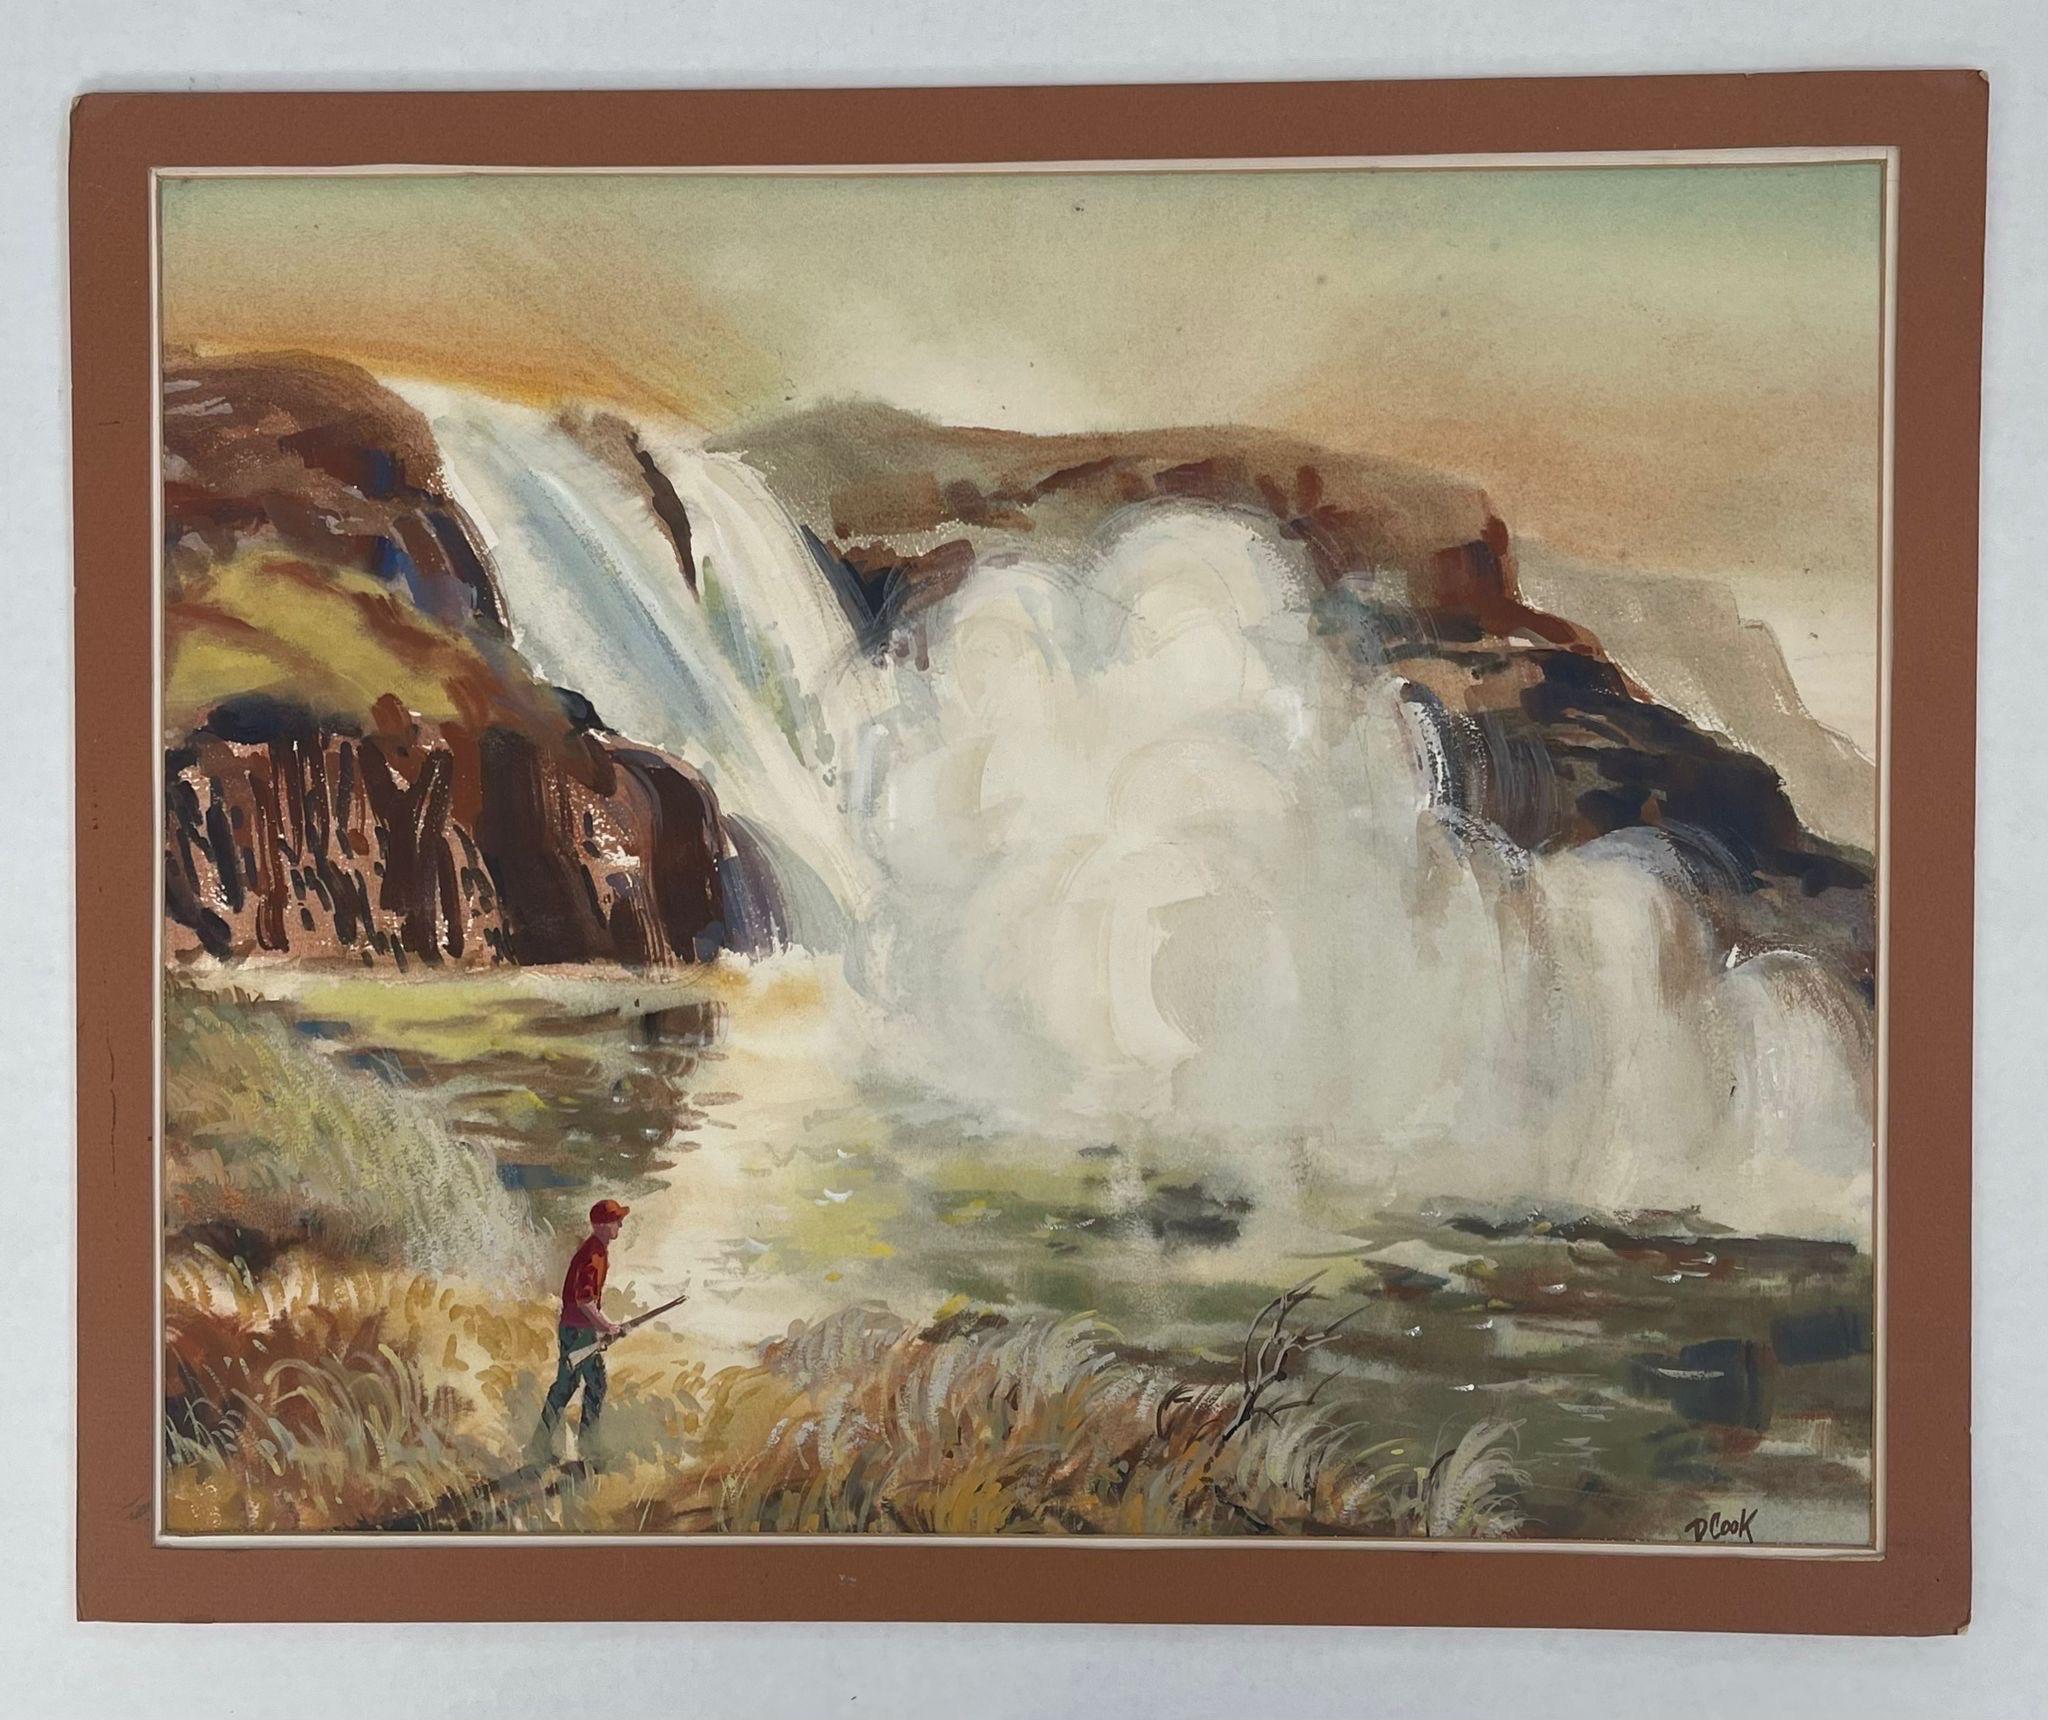 Vintage Artwork of Hunter Gaging Upon Waterfall Landscape. Possibly Watercolor on Paper. Signed in the Lower Corner D Cook as Pictured. Vintage Condition Consistent with Age as Pictured.

Dimensions. 22 W ; 1/4 D ; 18 H